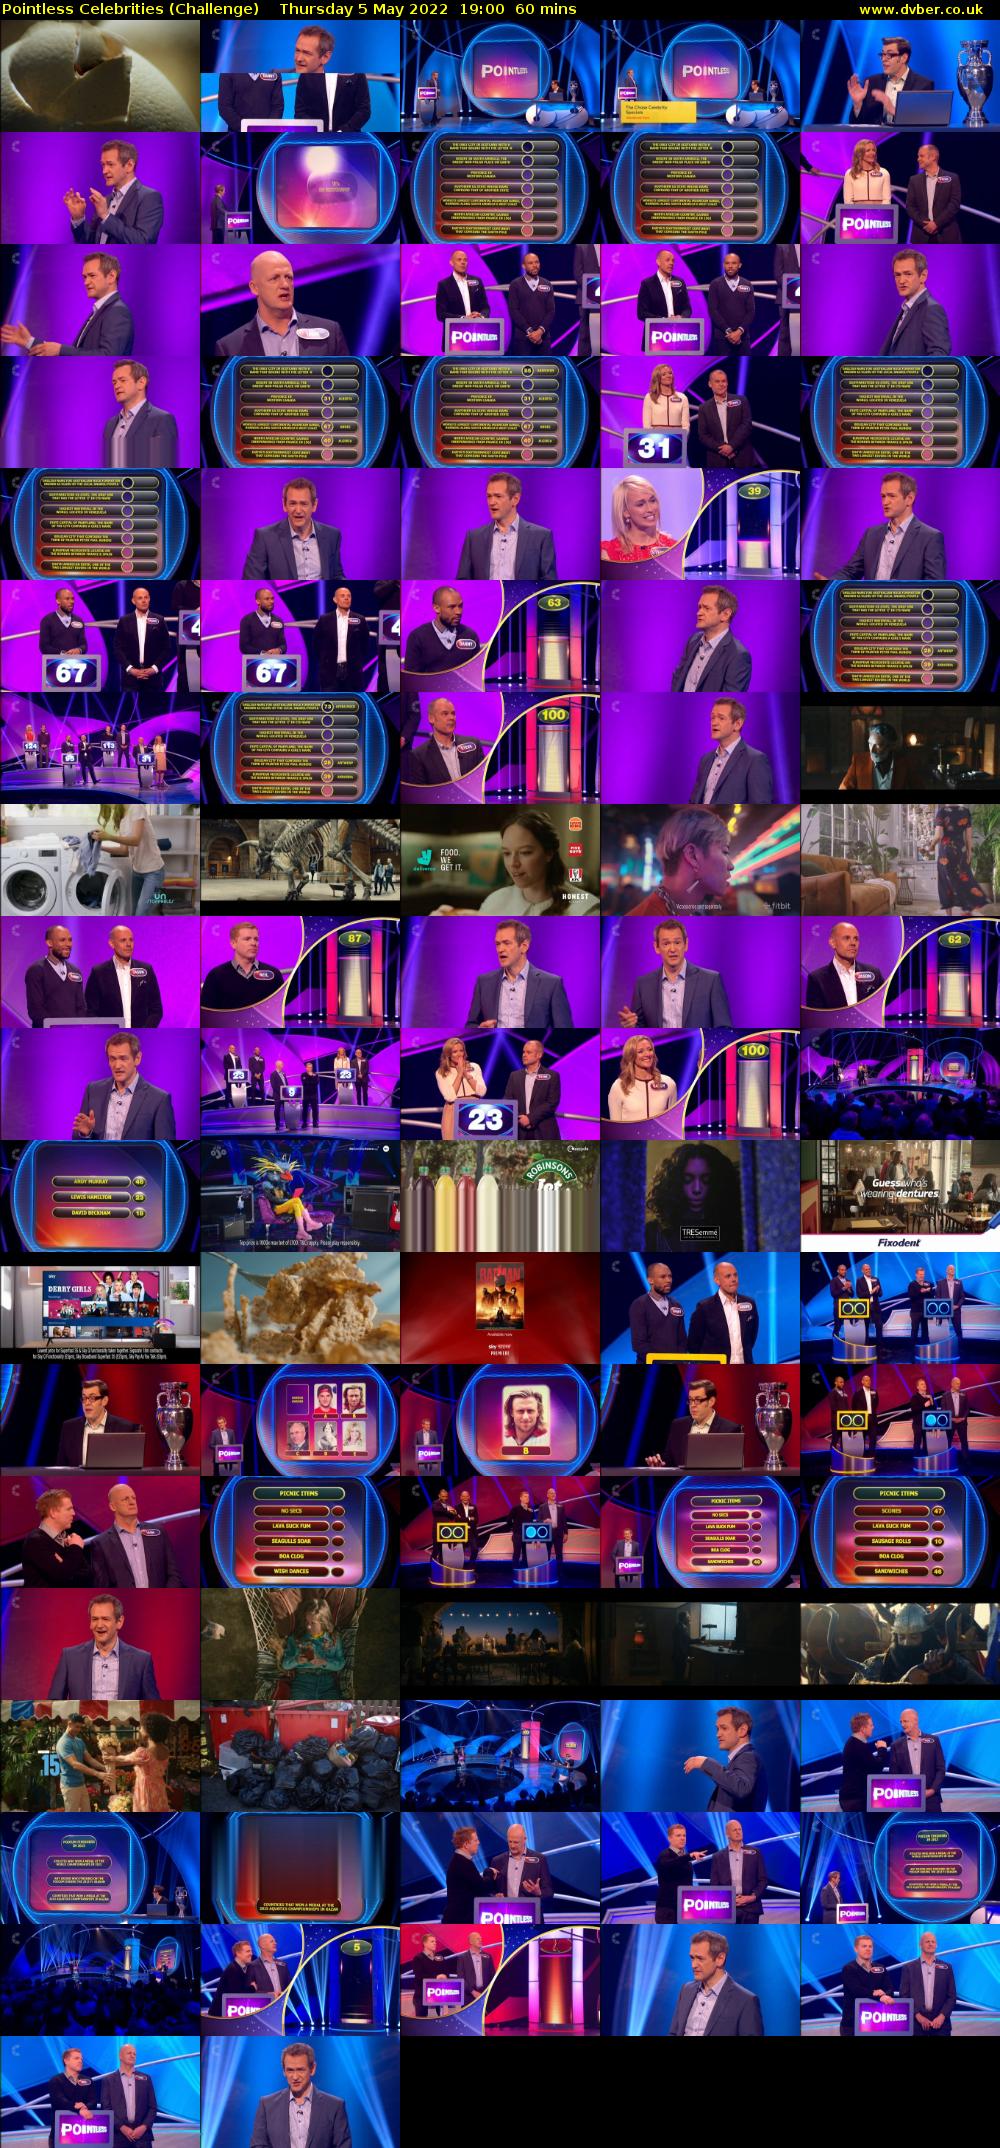 Pointless Celebrities (Challenge) Thursday 5 May 2022 19:00 - 20:00